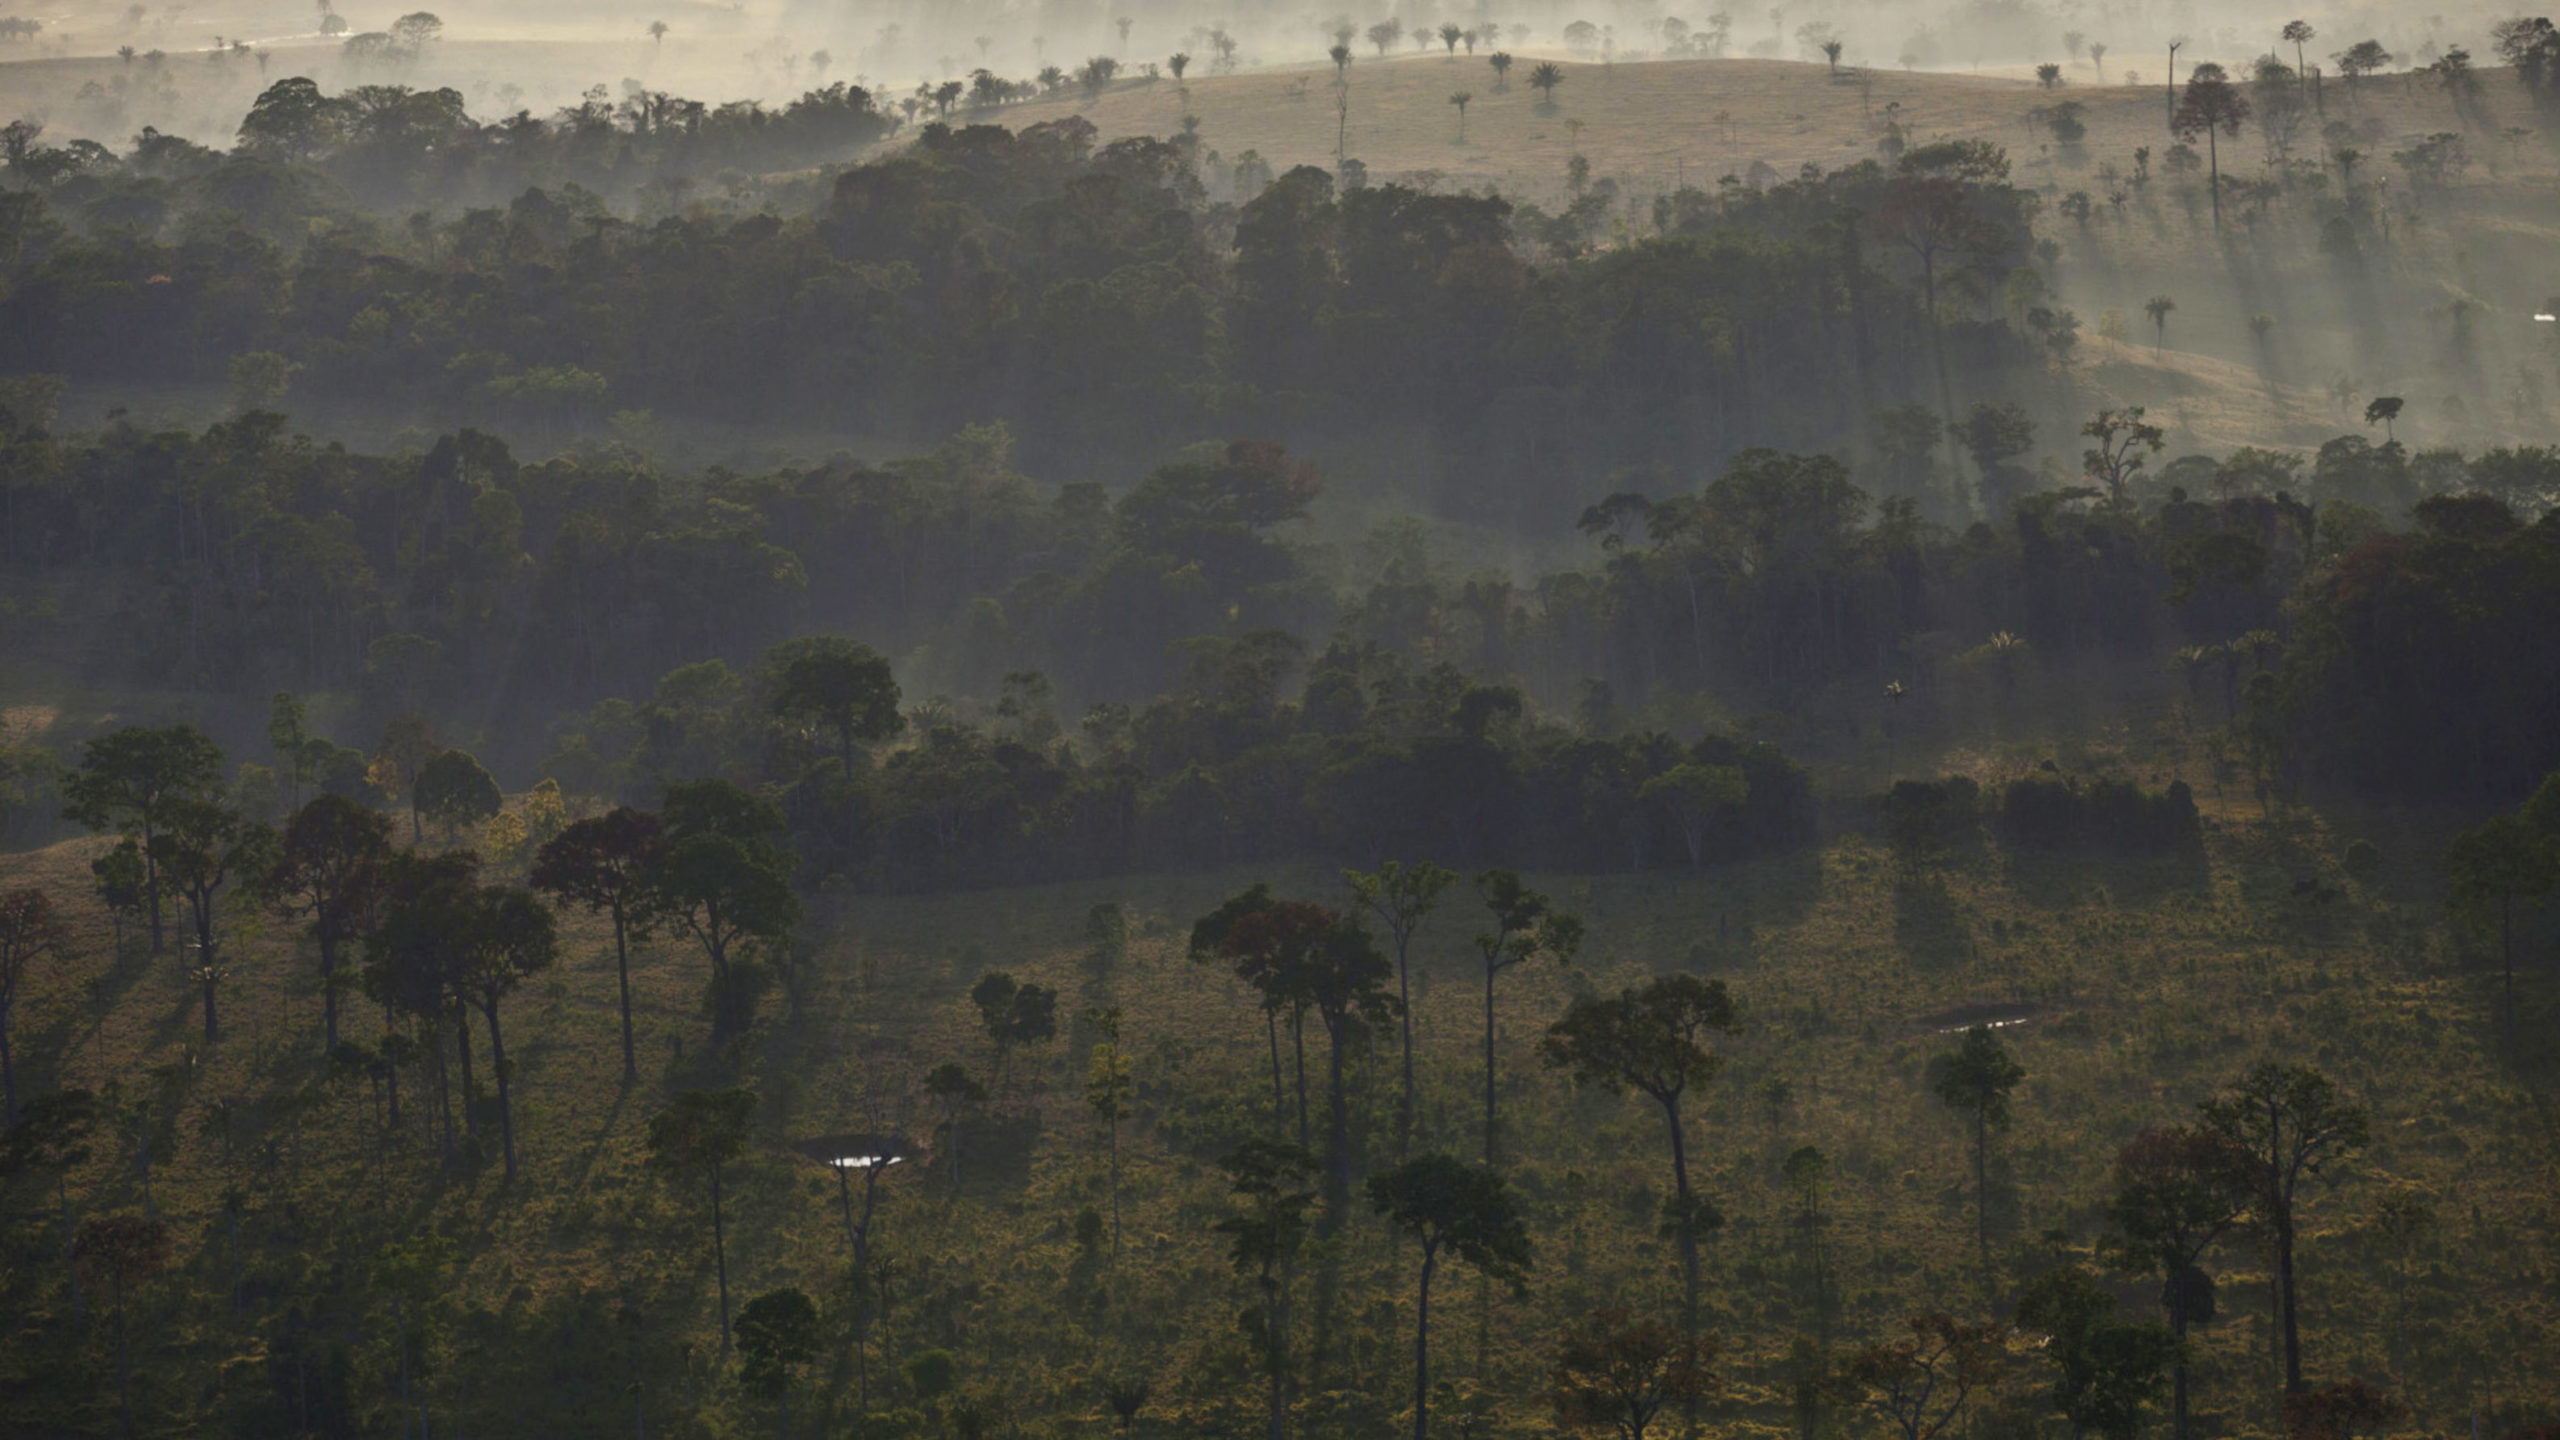 Protected by law, several Brazil nut trees are left behind after controlled deforestation in a portion of the Amazon jungle that sits along BR 364, between the cities of Rio Branco and Senador Guiomard, Brazil, on Thursday, Sept. 18, 2014. The United Nations 2014 Climate Summit is scheduled for Sept. 23. Photographer: Dado Galdieri/Bloomberg 